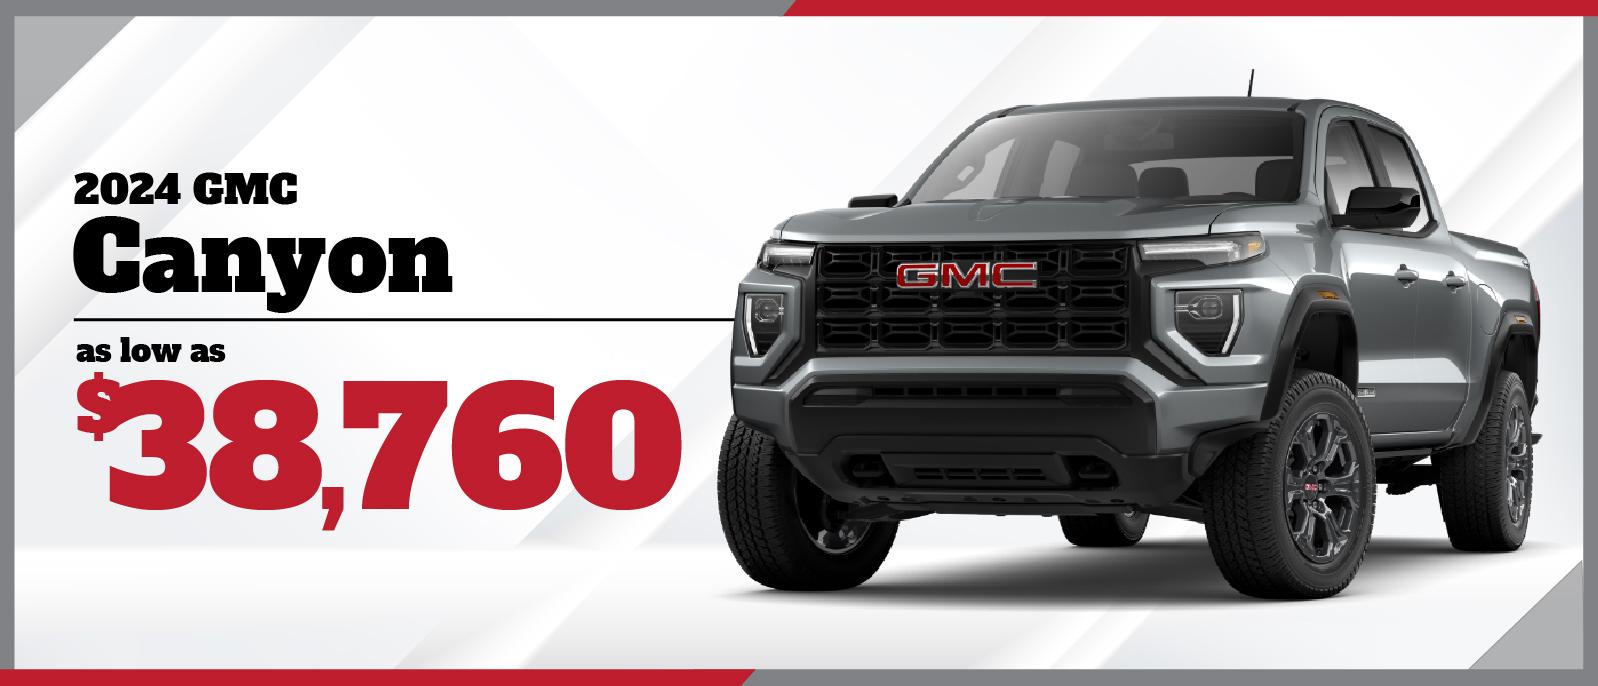 NEW GMC Canyon - as low as $38,760